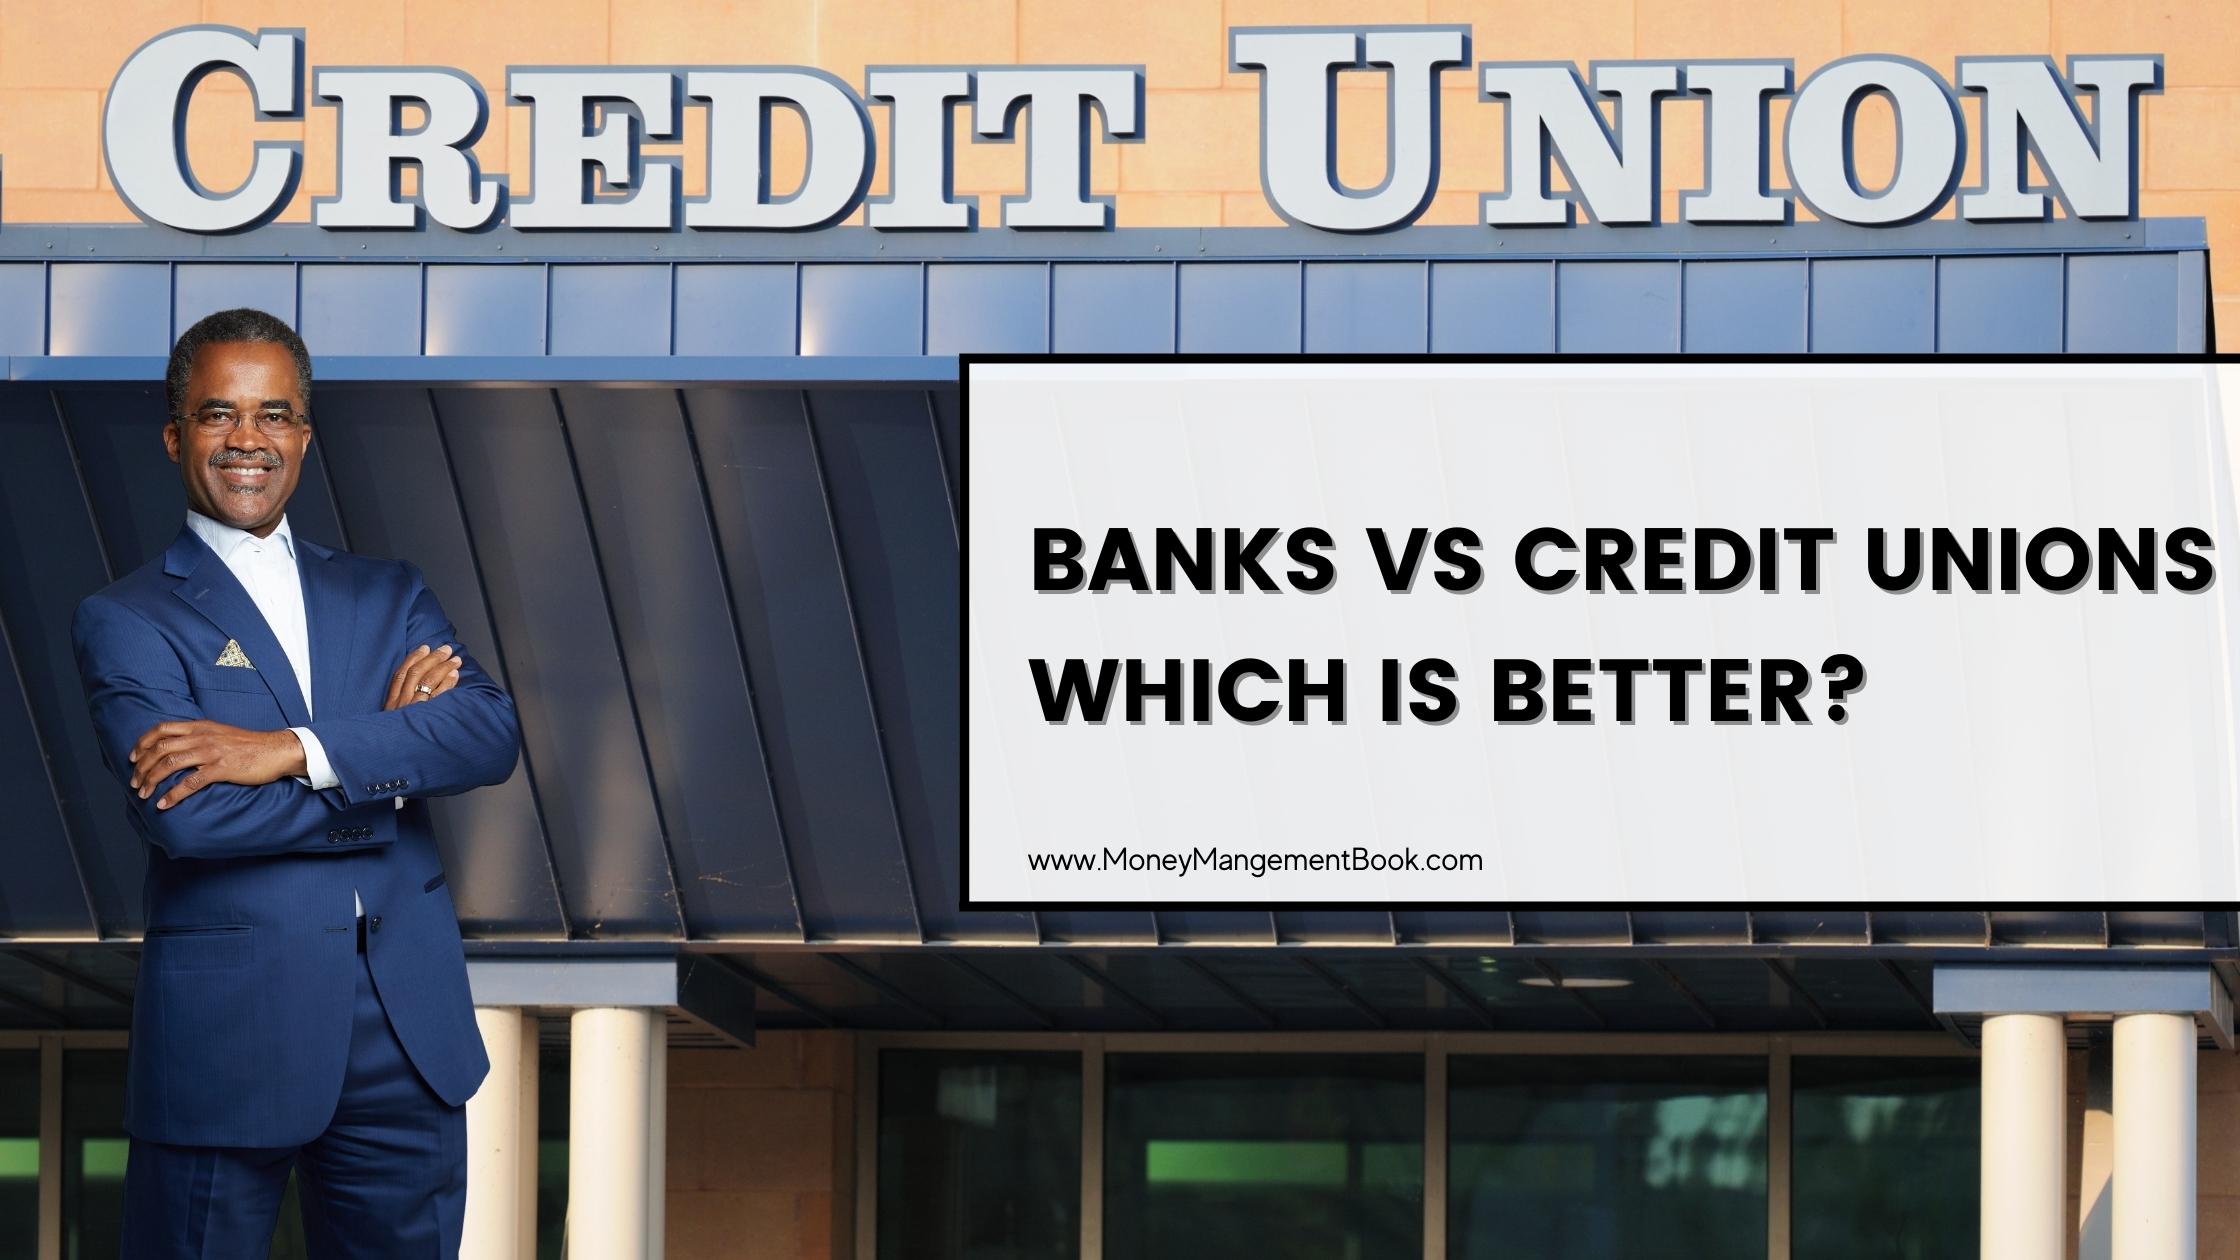 Which Is Better? Banks or Credit Unions